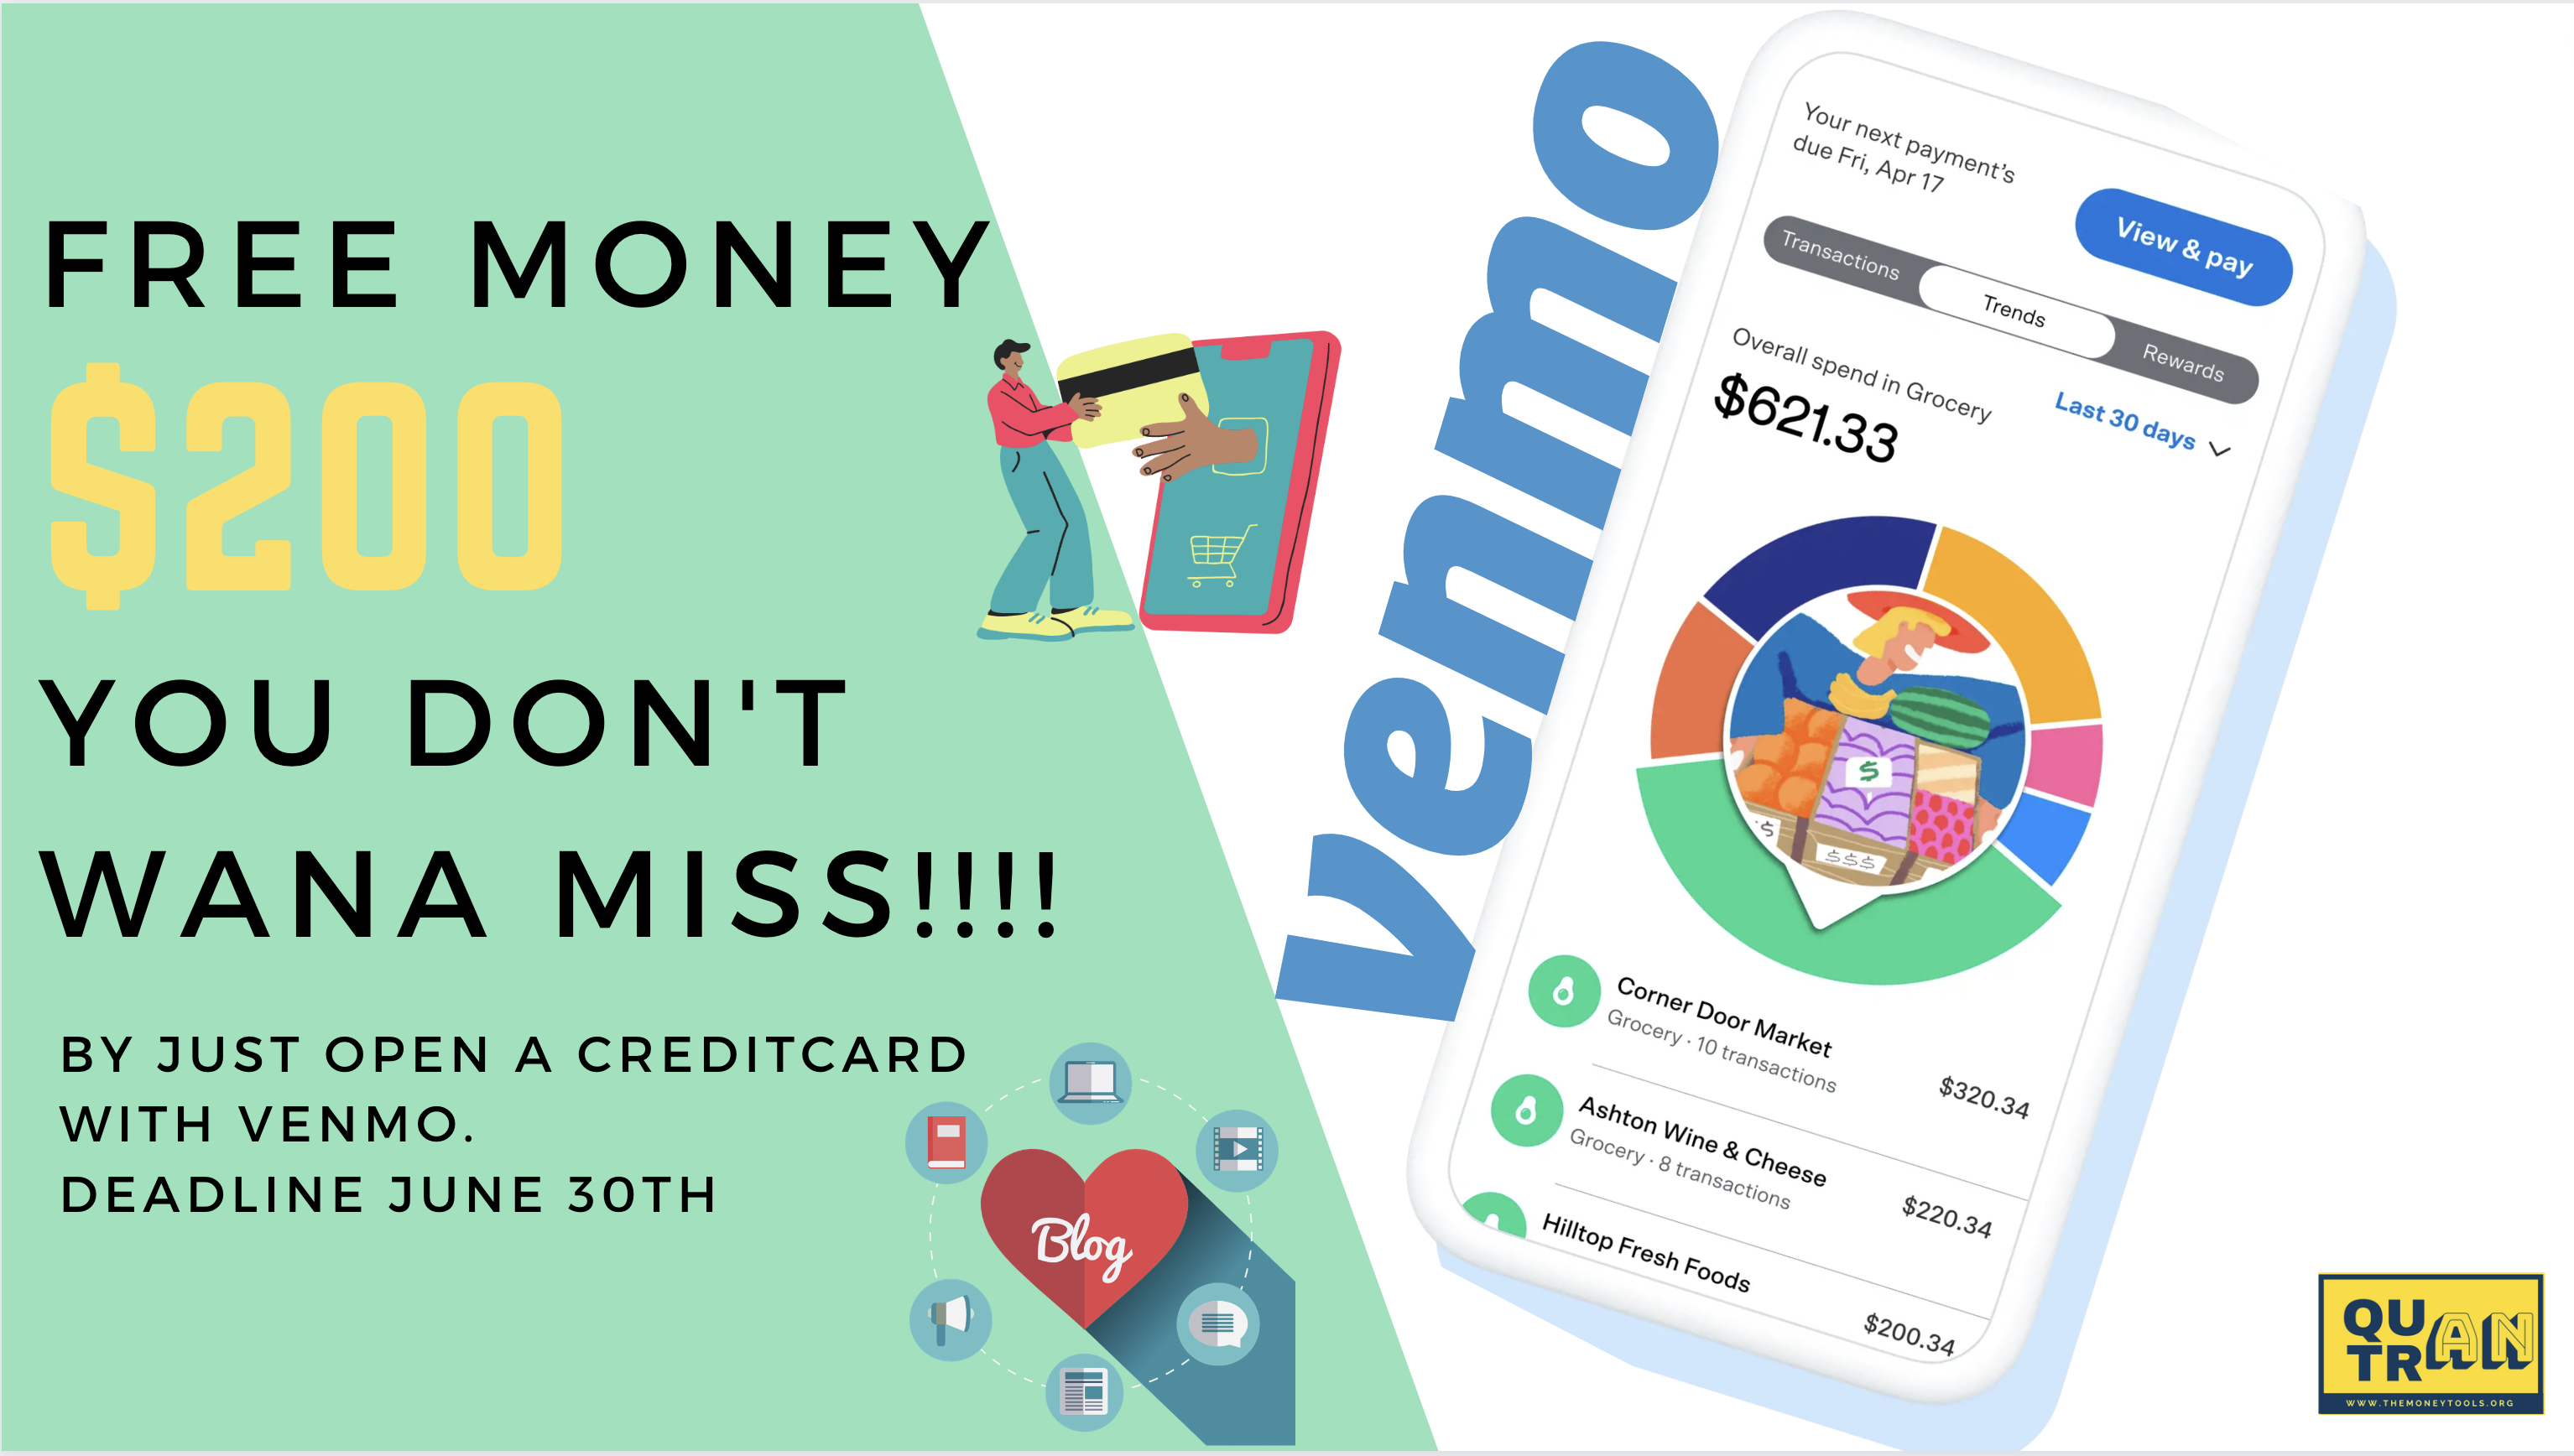 3 WAYS TO EARN MONEY WITH VENMO IN 2023 CREDITCARD OFFERS UP TO 3